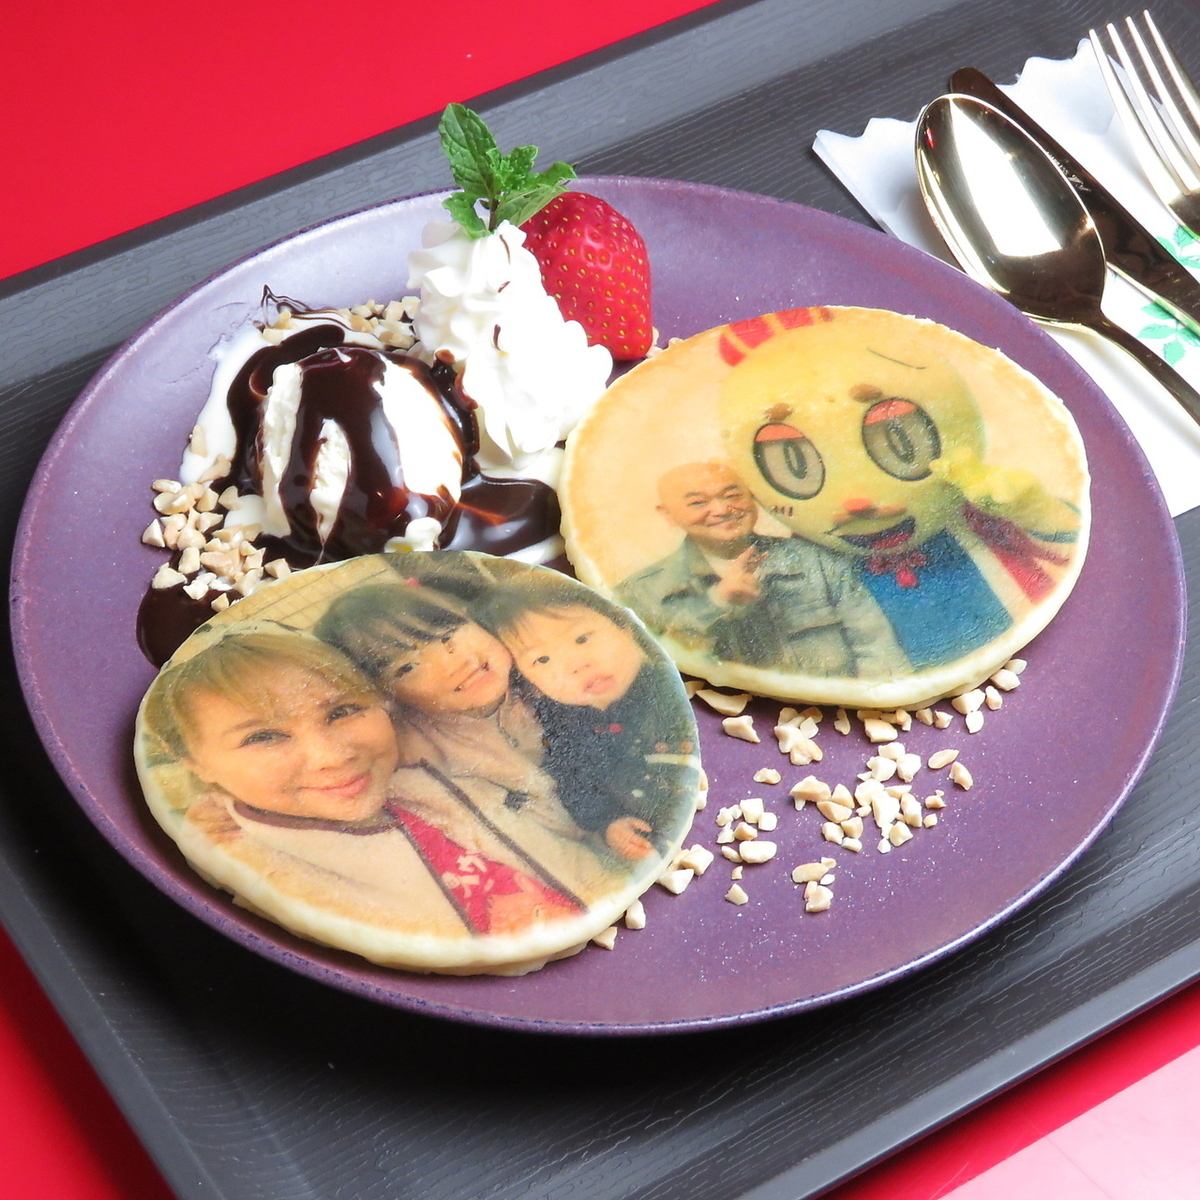 Make your own original pancakes for special occasions such as anniversaries!